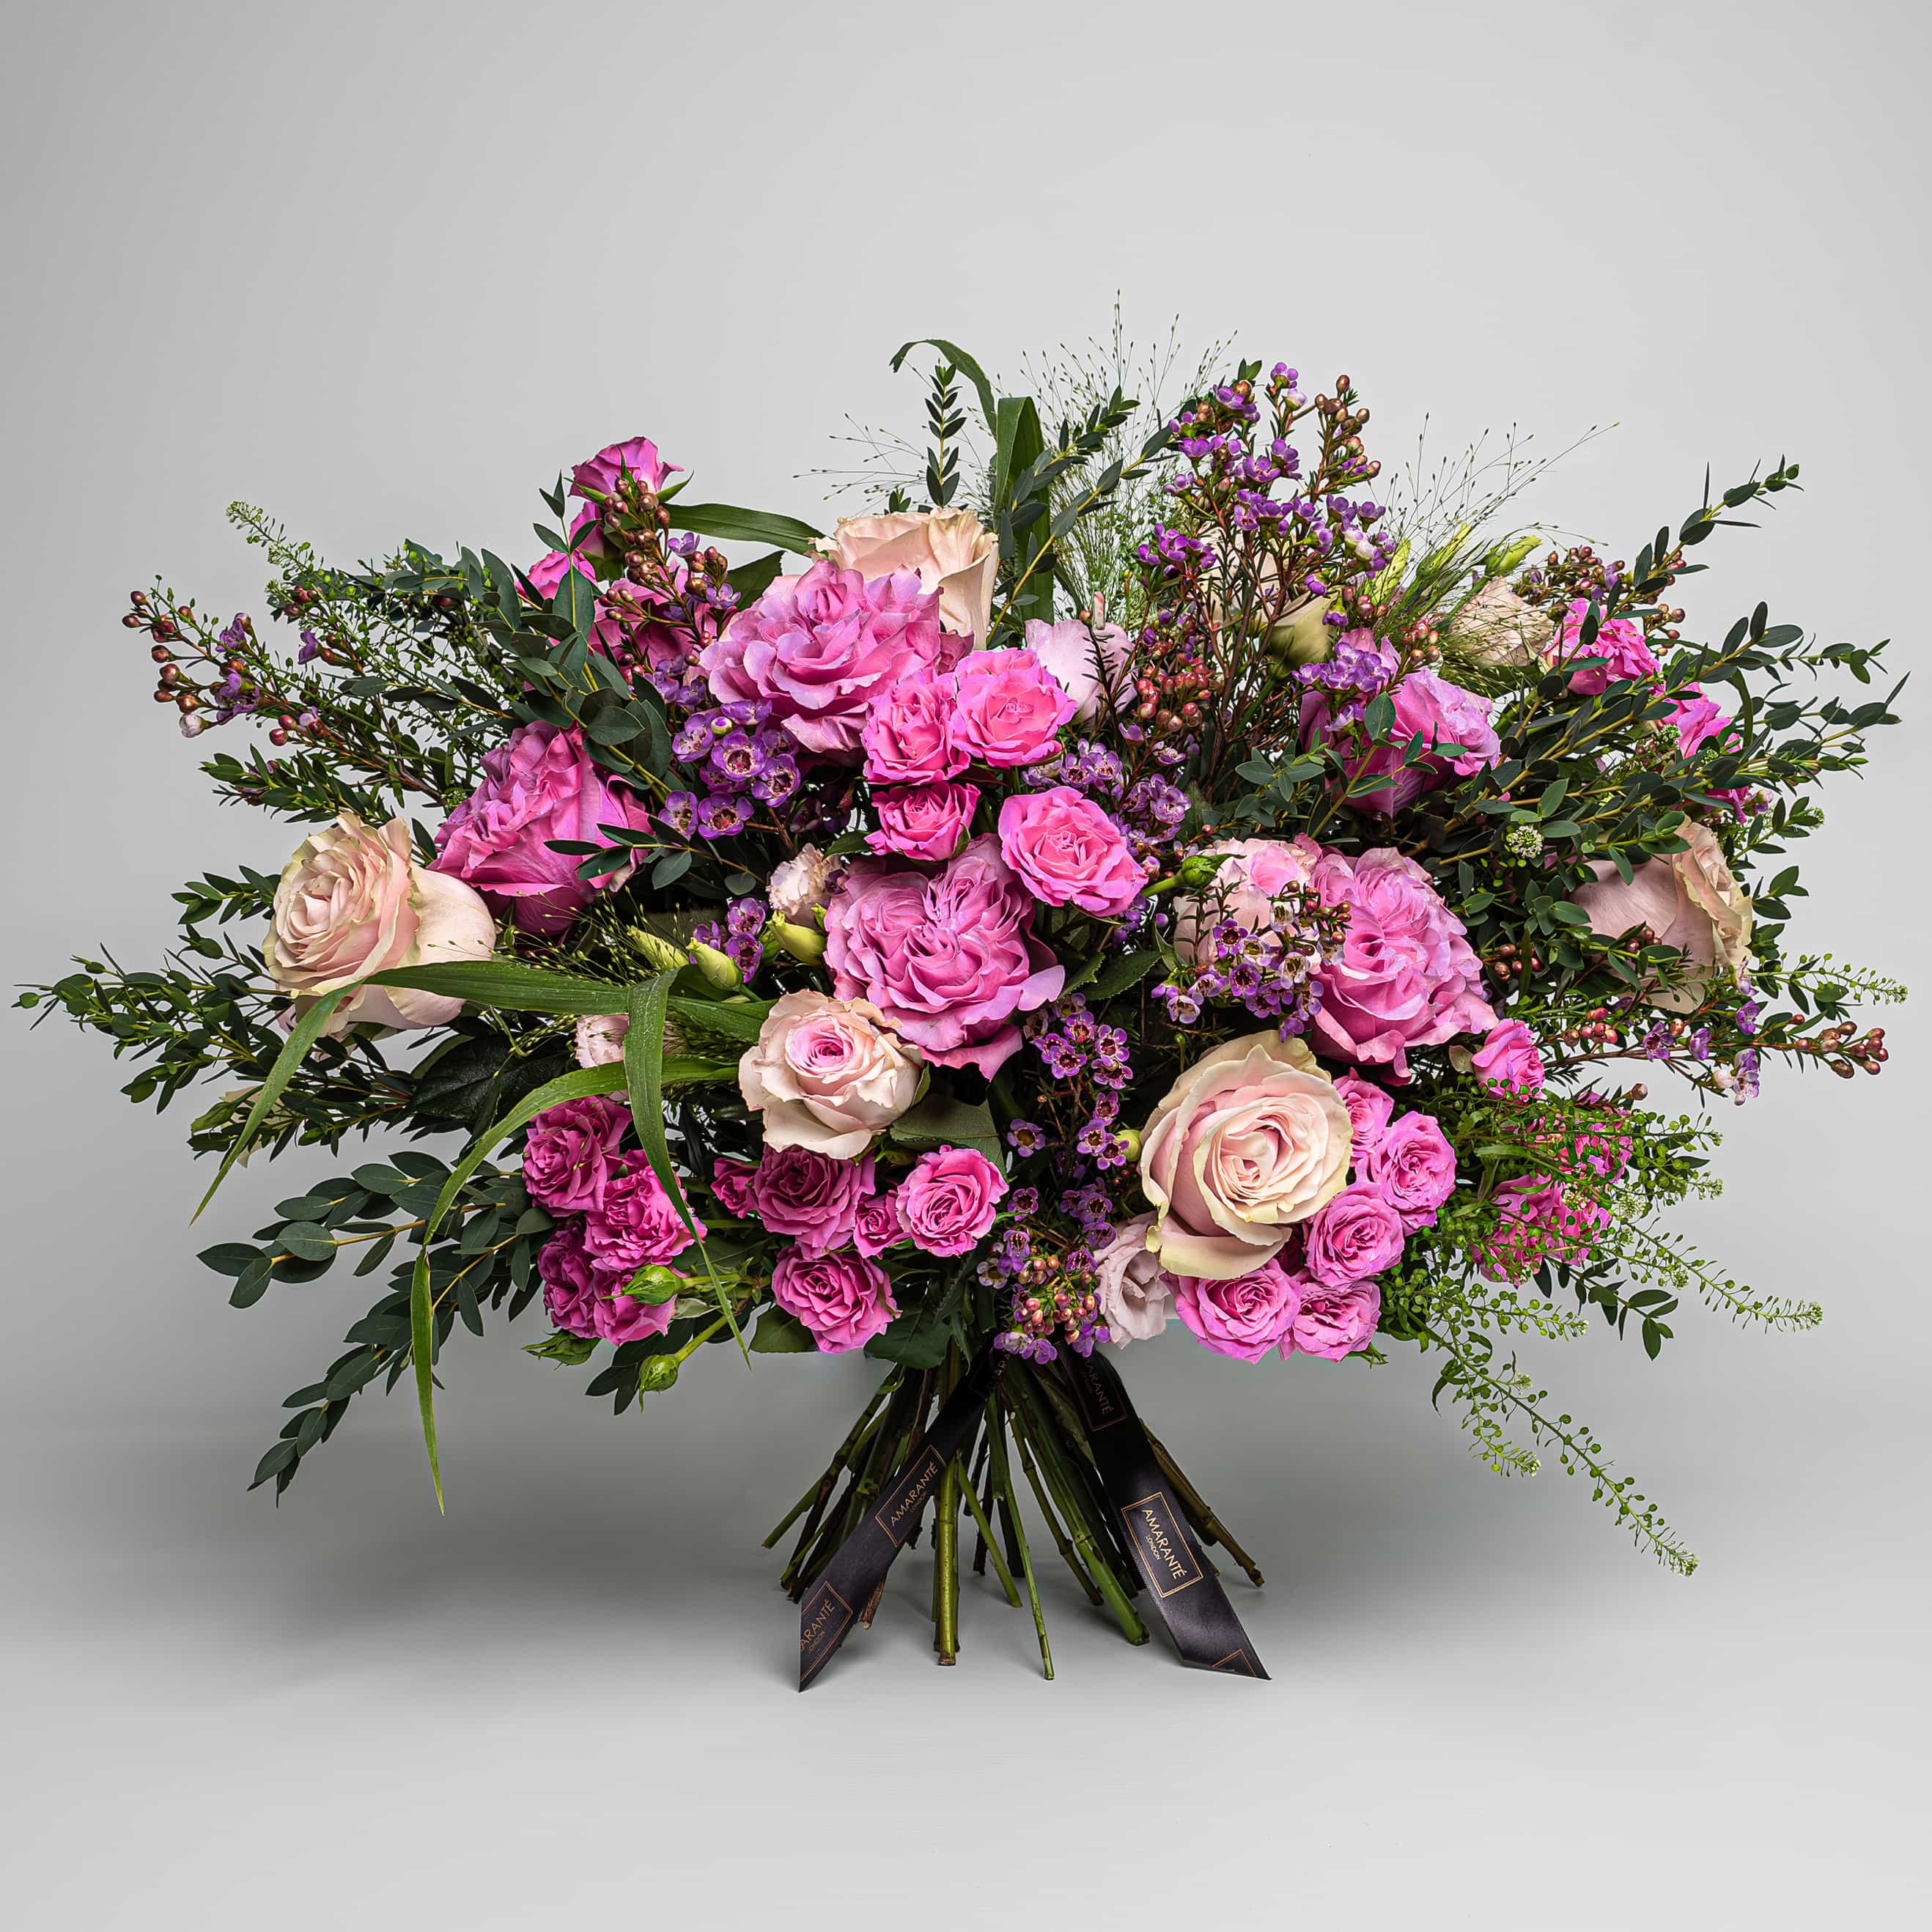 An enchanting bouquet of fresh Valentine&#39;s Day flowers featuring a stunning mix of pink roses, symbolising love and affection. This sophisticated arrangement is a chic and stylish way to express your feelings this lover&#39;s day. Free UK delivery on this luxury bouquet.